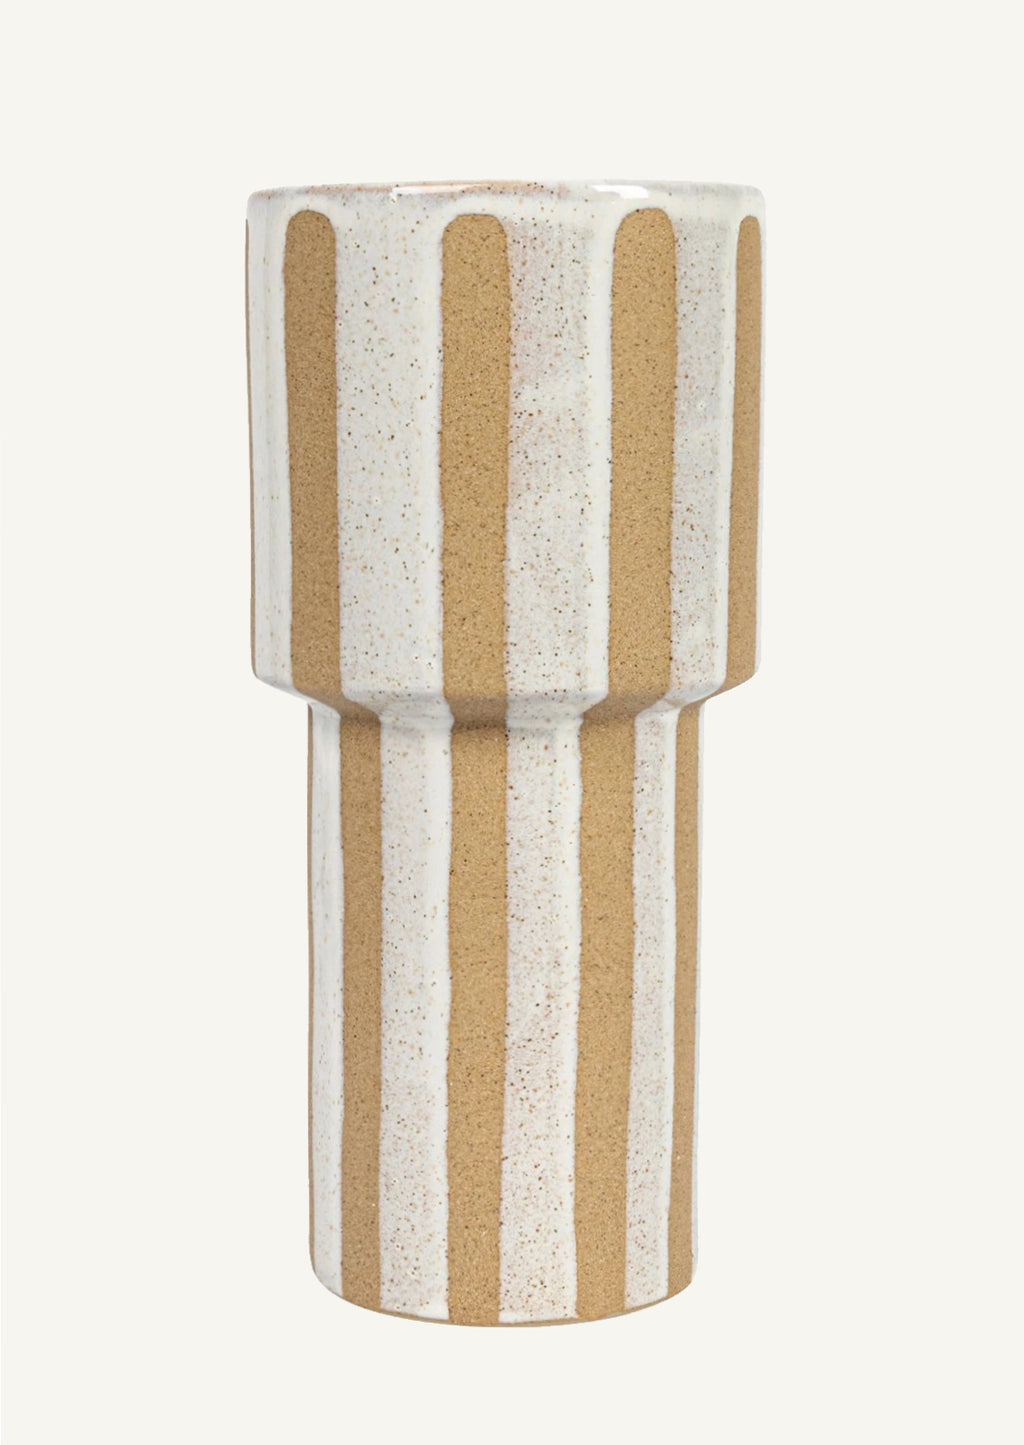 1: A tall sculptural vase with sandy and white vertical stripes.